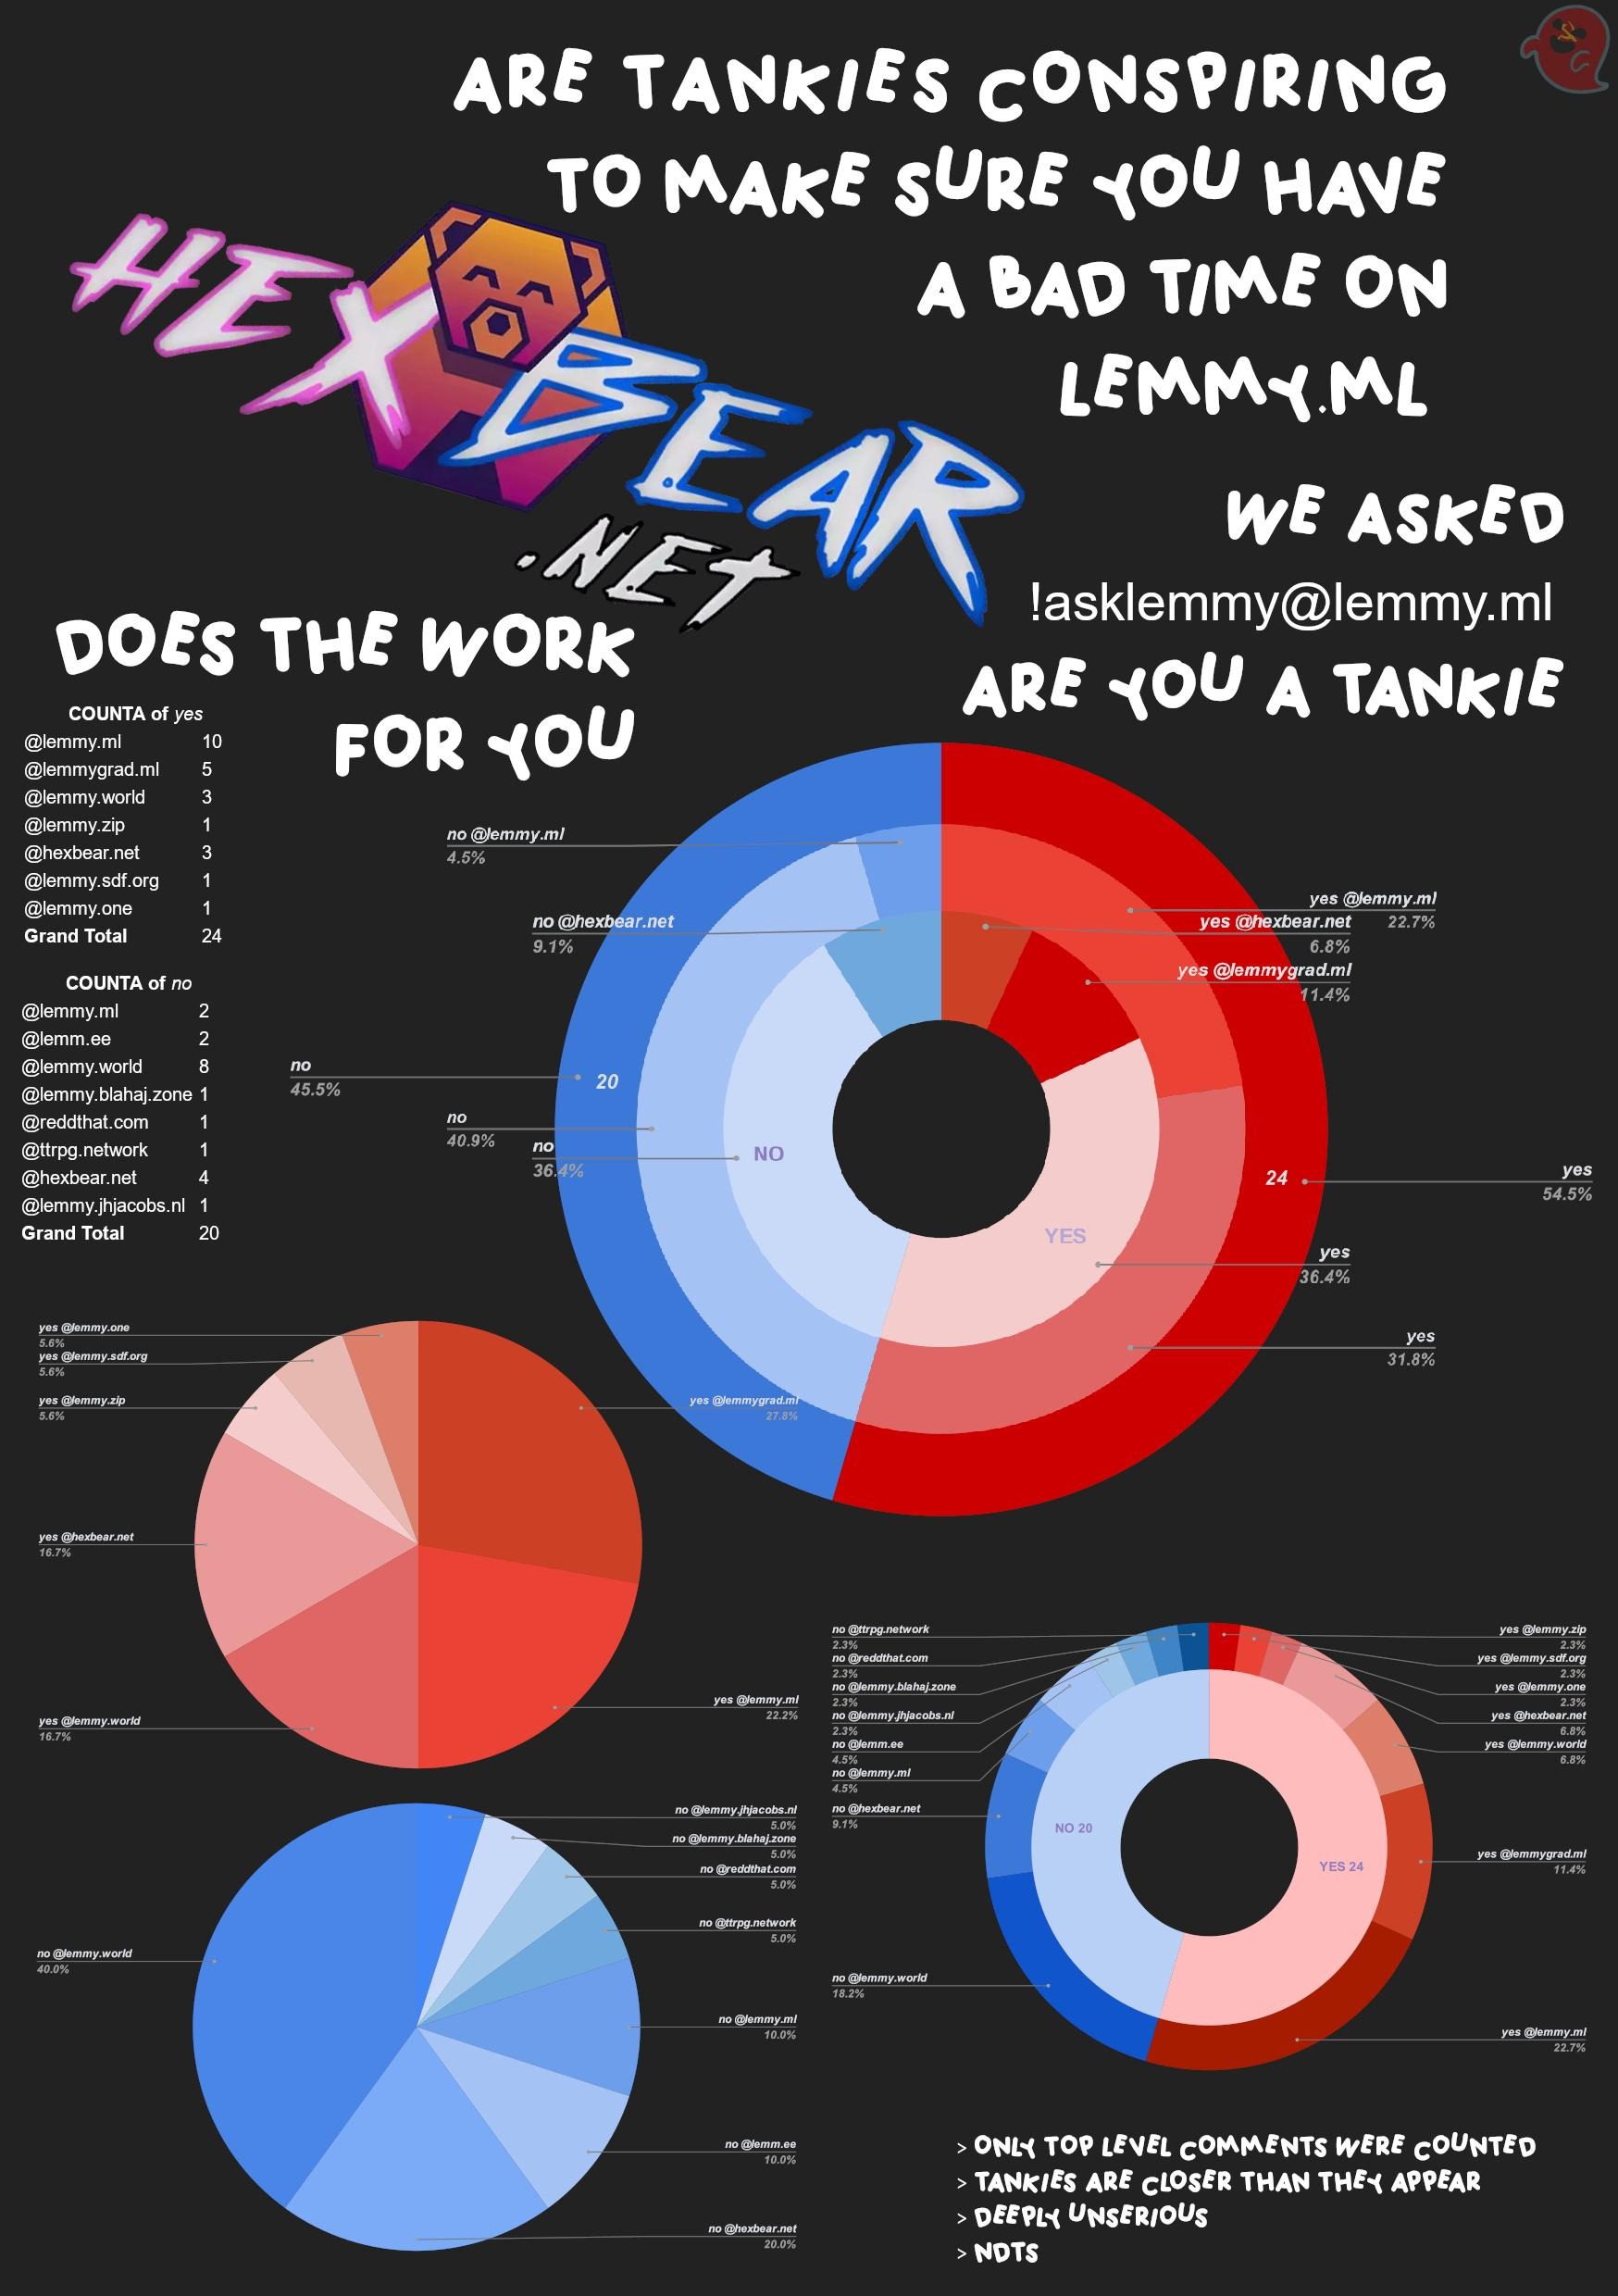 Image description: A5 page, with various pie charts and text, indicating the results of an informal poll from lemmy.ml, full image text in spoiler 